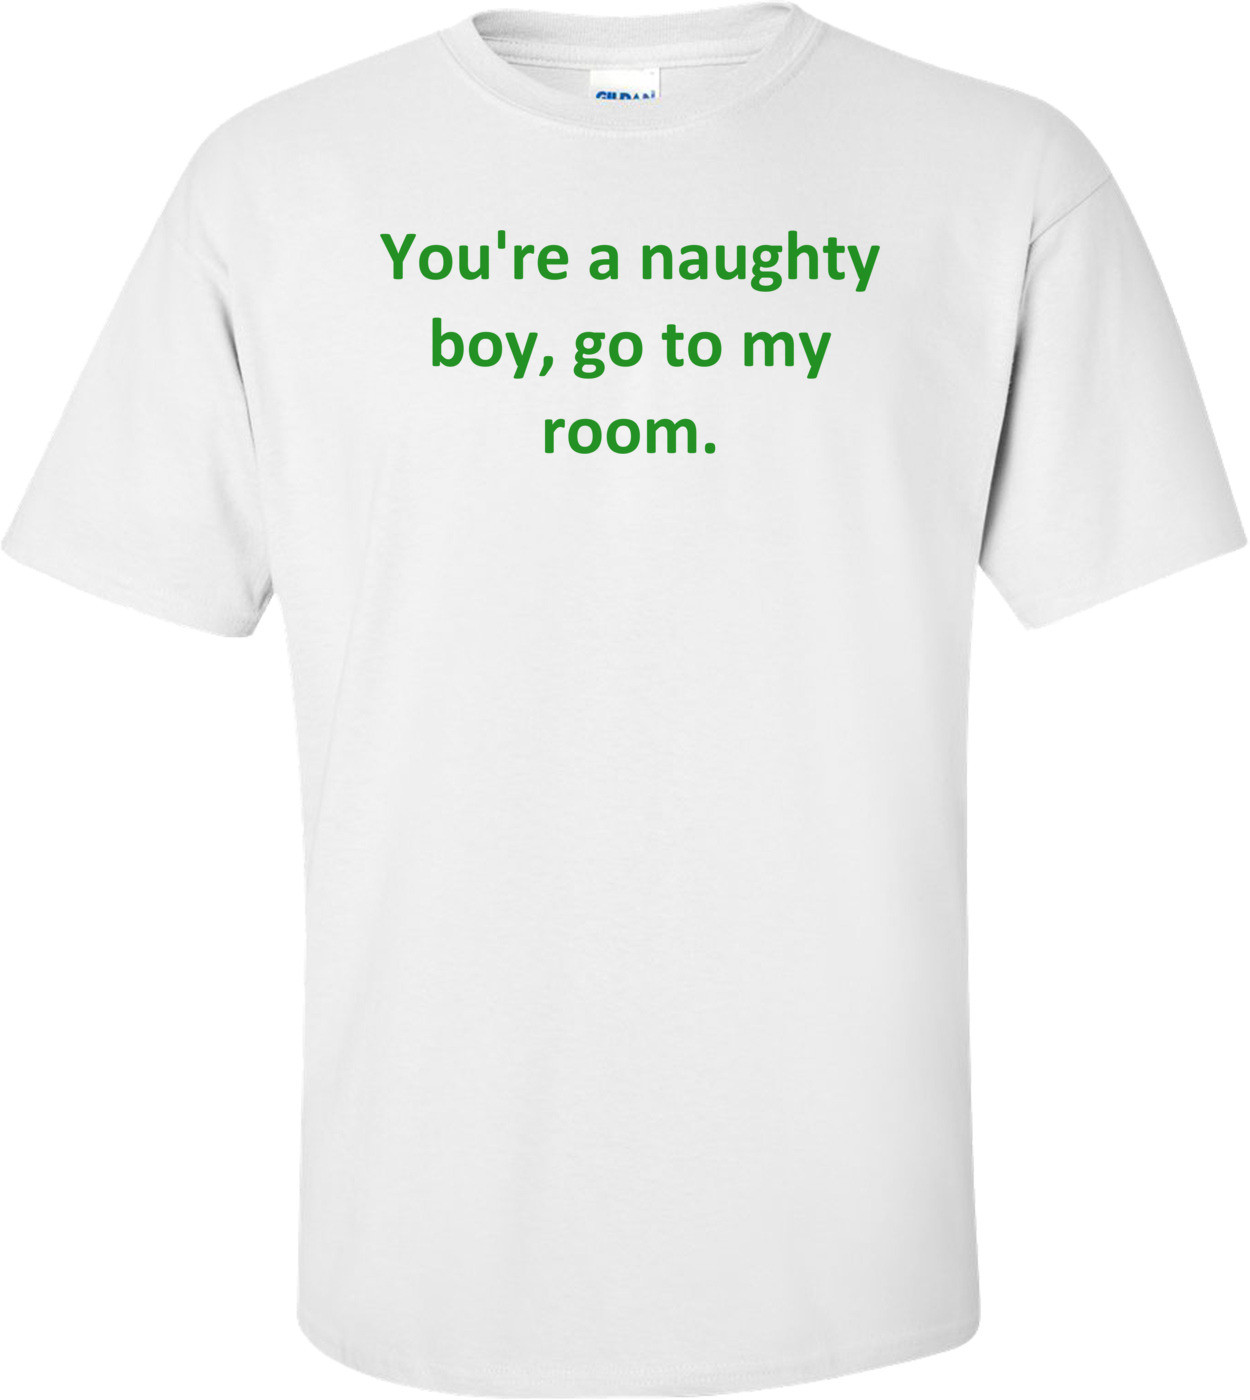 You're a naughty boy, go to my room. Shirt